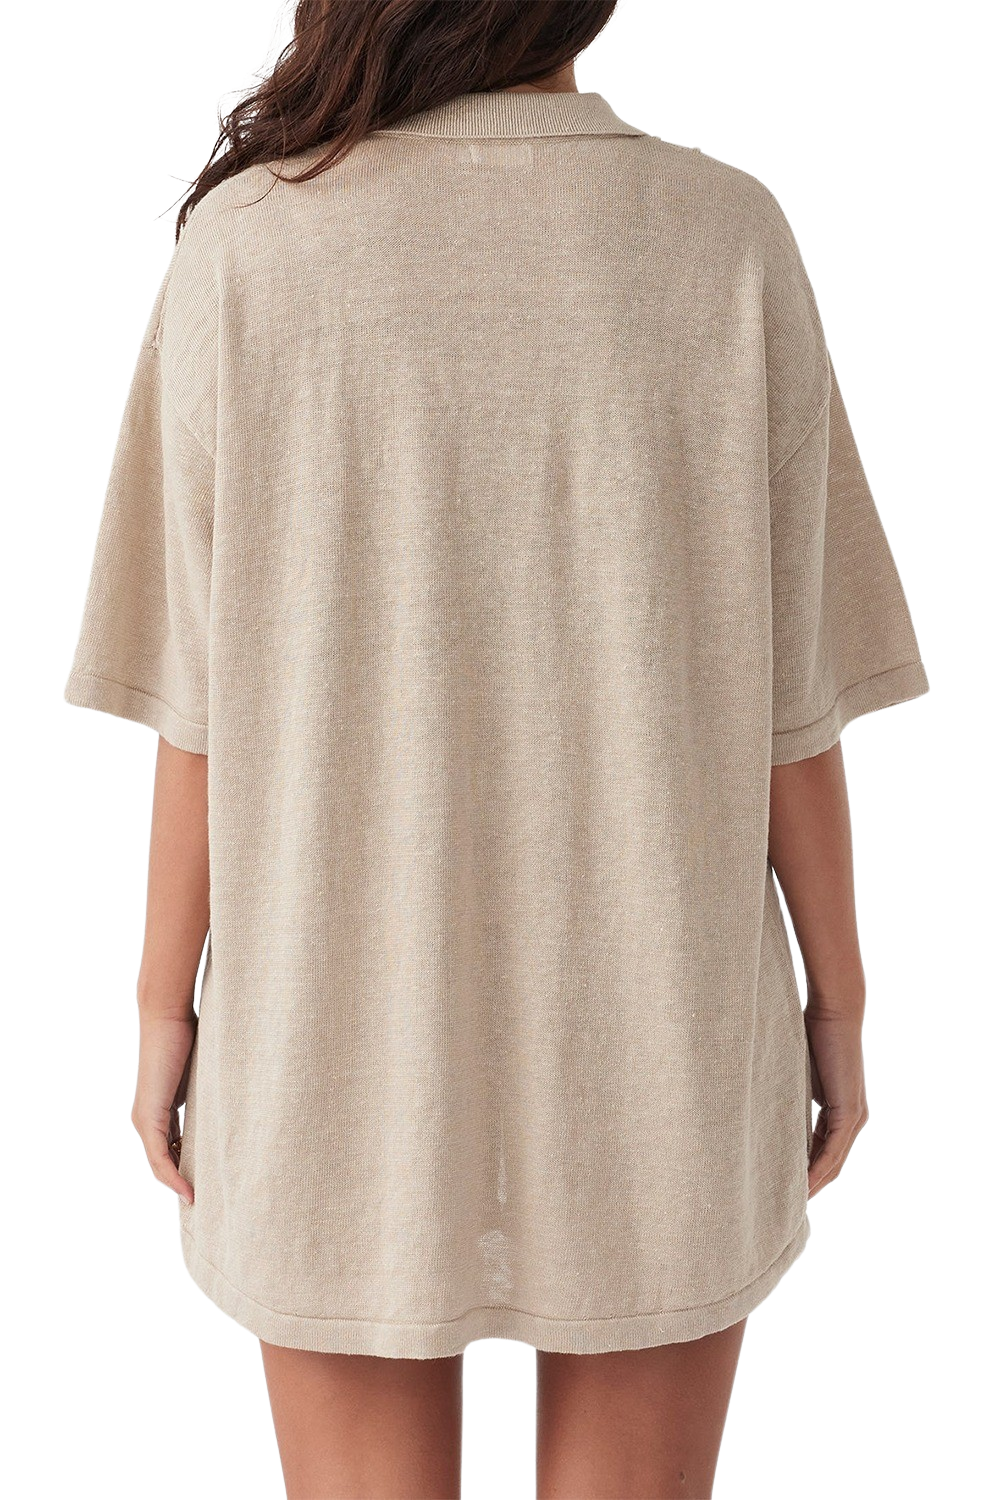 Darcy Shirt - Taupe